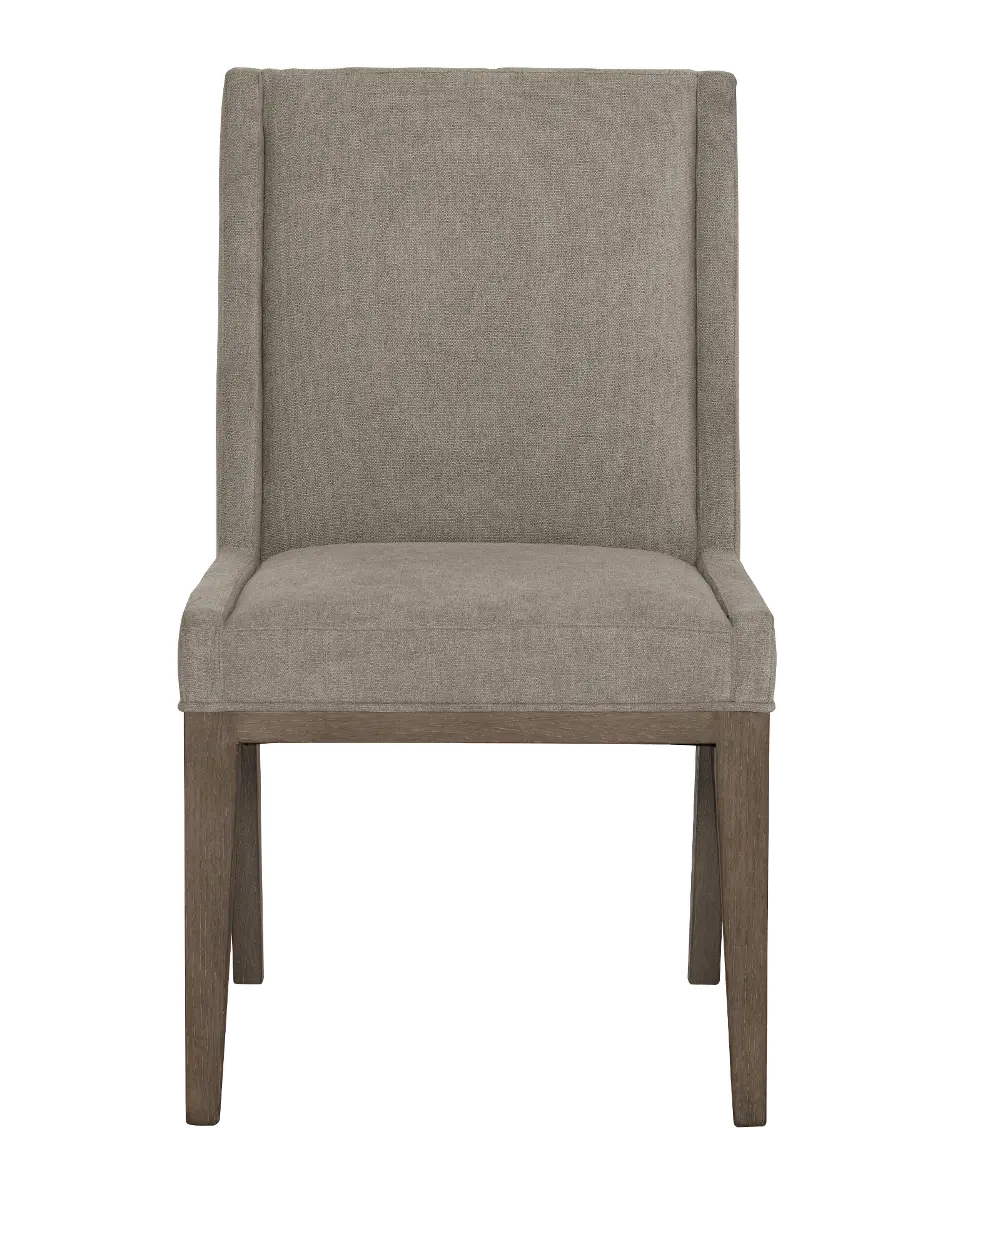 Contemporary Charcoal Gray Upholstered Dining Chair - Linea-1